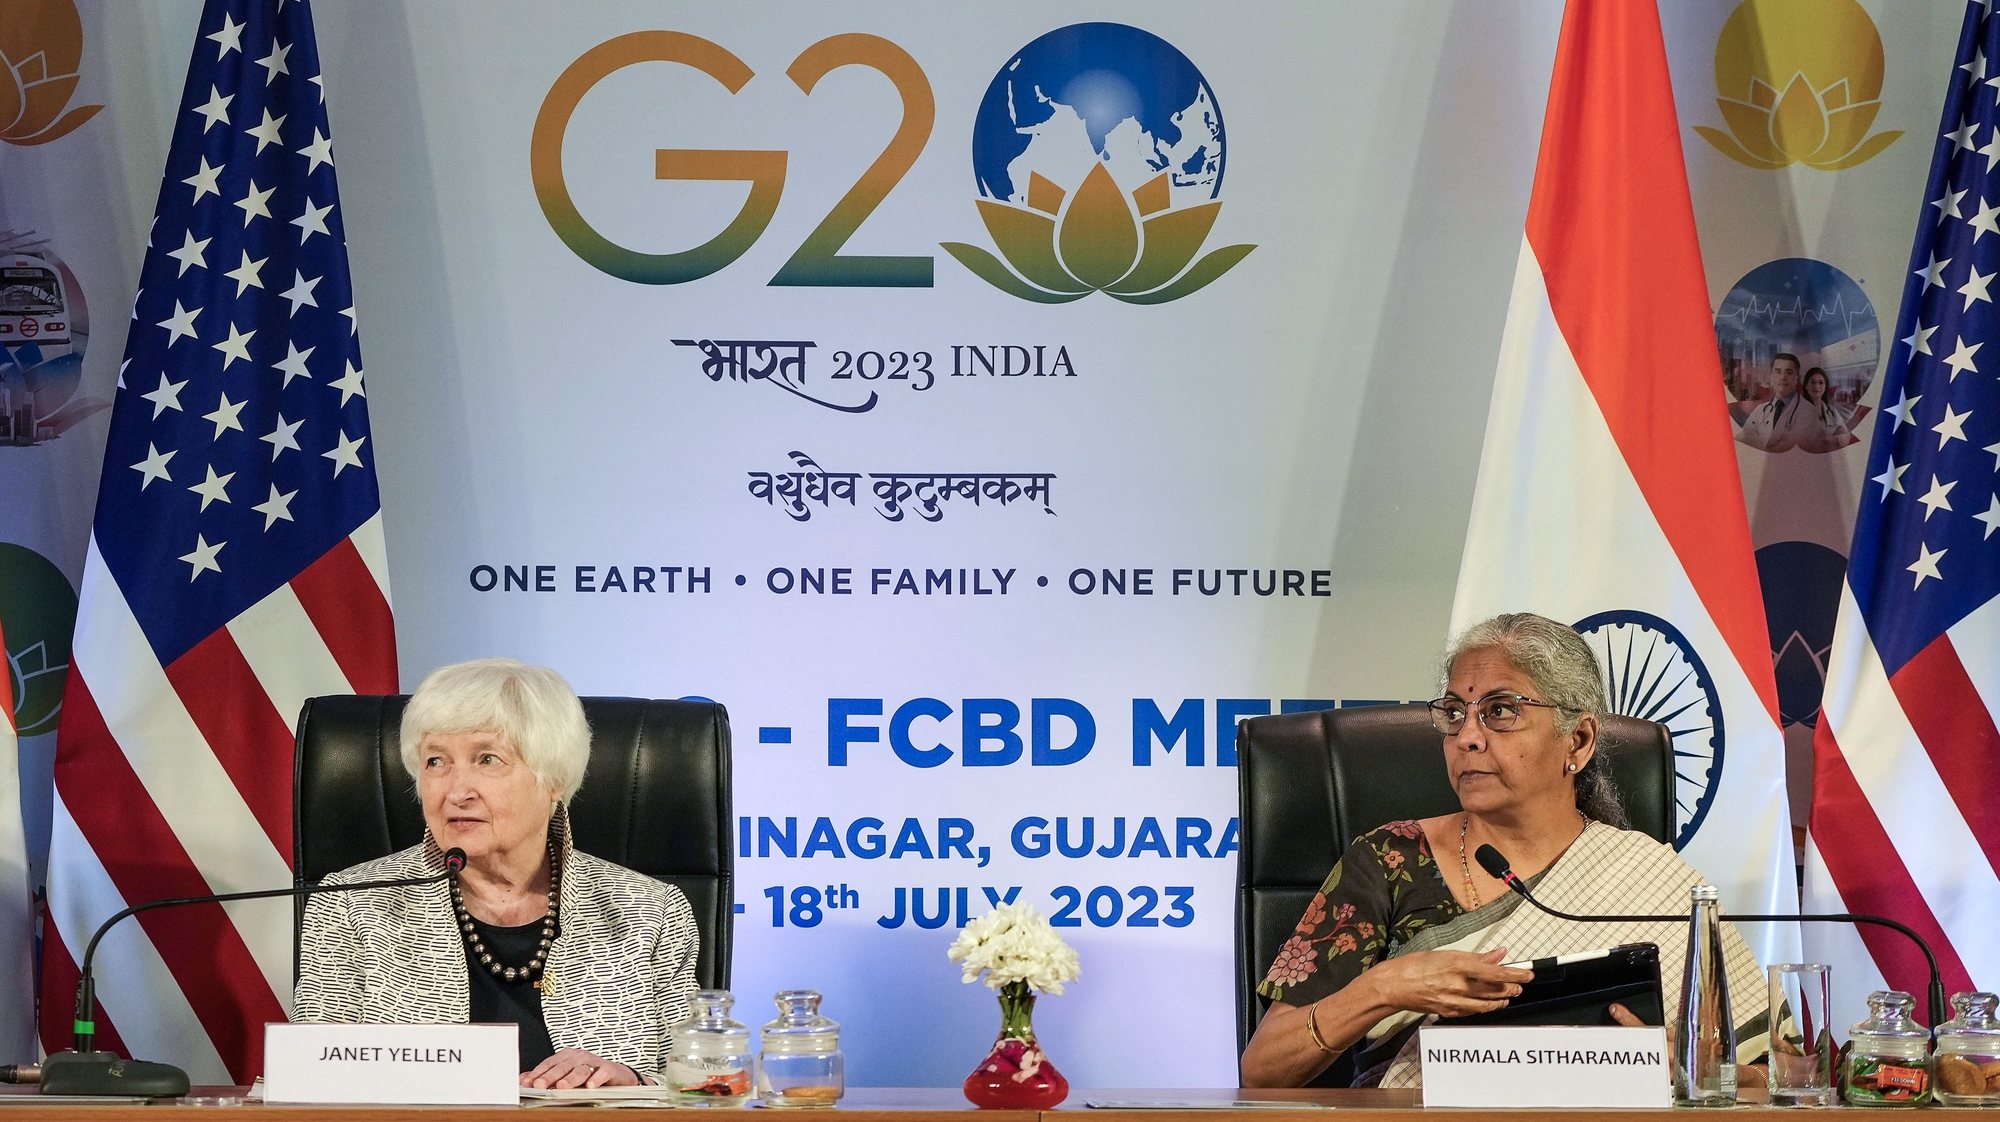 epa10751306 US Treasury Secretary Janet Yellen (L) and India&#039;s Finance Minister Nirmala Sitharaman address the media during a press conference on the sidelines of a third Finance Ministers and Central Bank Governors (FMCBG) meeting, in Gandhinagar, capital of Gujarat state, India, 17 July 2023. The Third G20 Finance Ministers and Central Bank Governors meeting under the Indian G20 Presidency takes place between 17 and 18 July 2023.  EPA/SIDDHARAJ SOLANKI